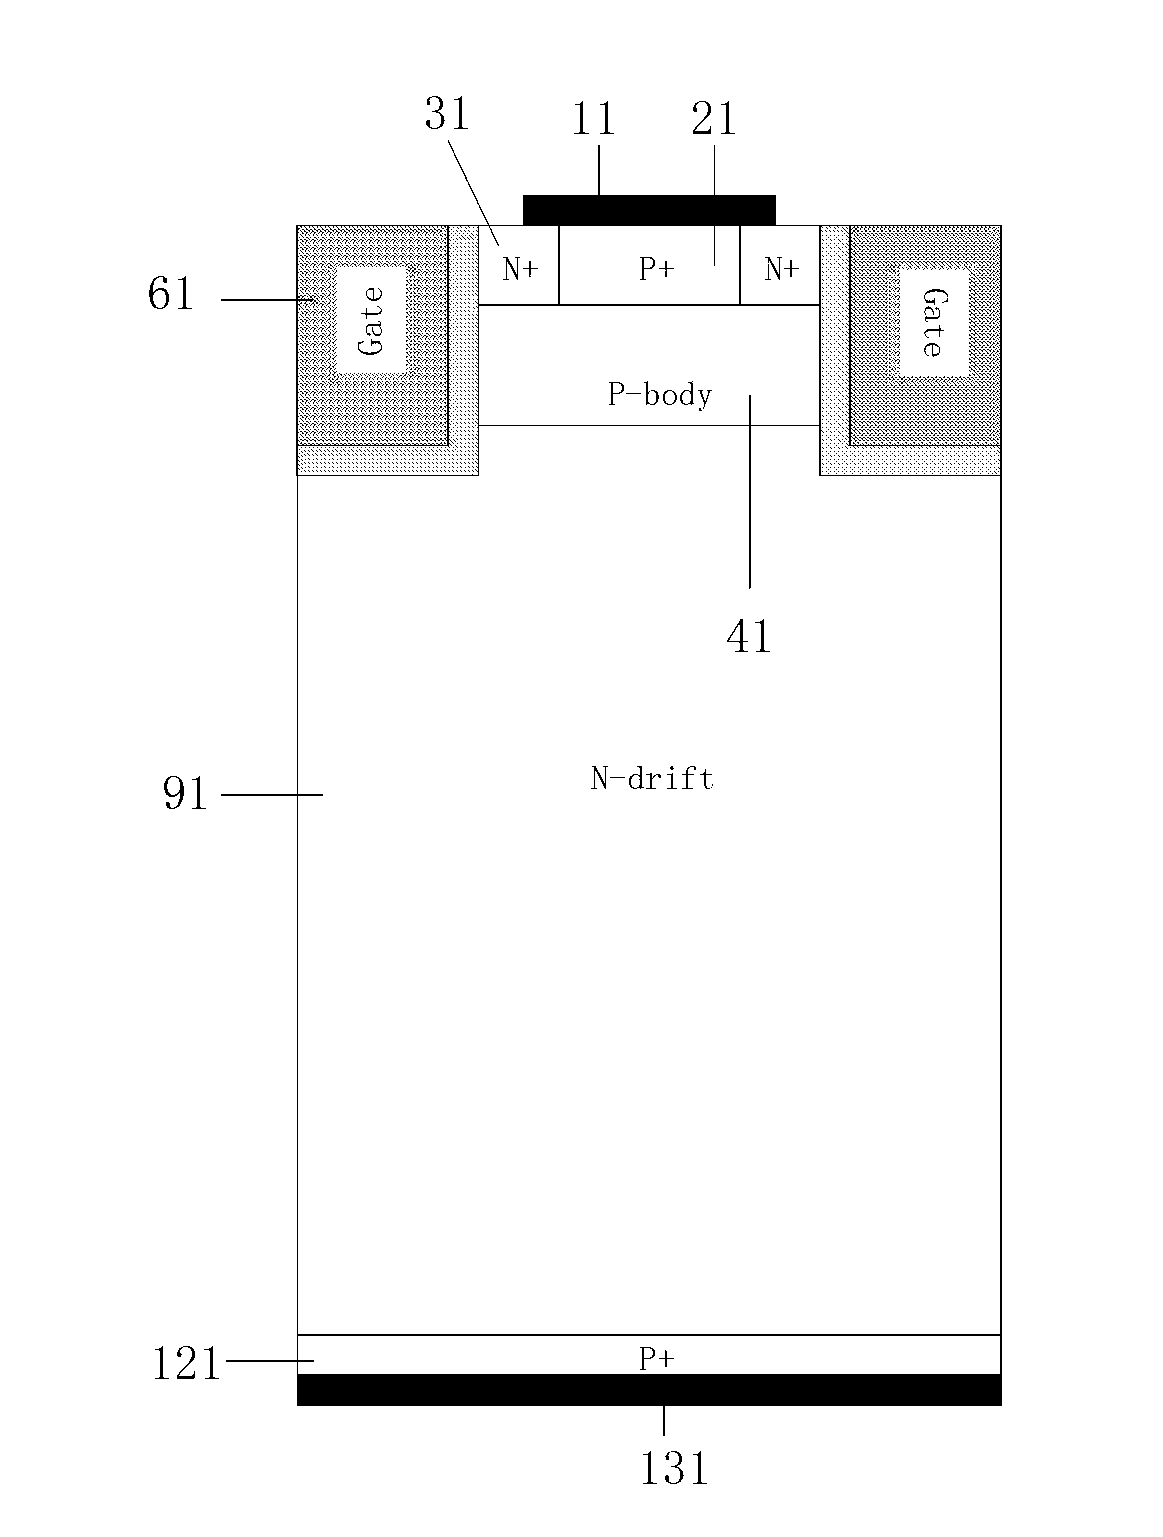 Reverse block (RB)-insulated gate bipolar transistor (IGBT) device provided with double-faced field stop with buried layers